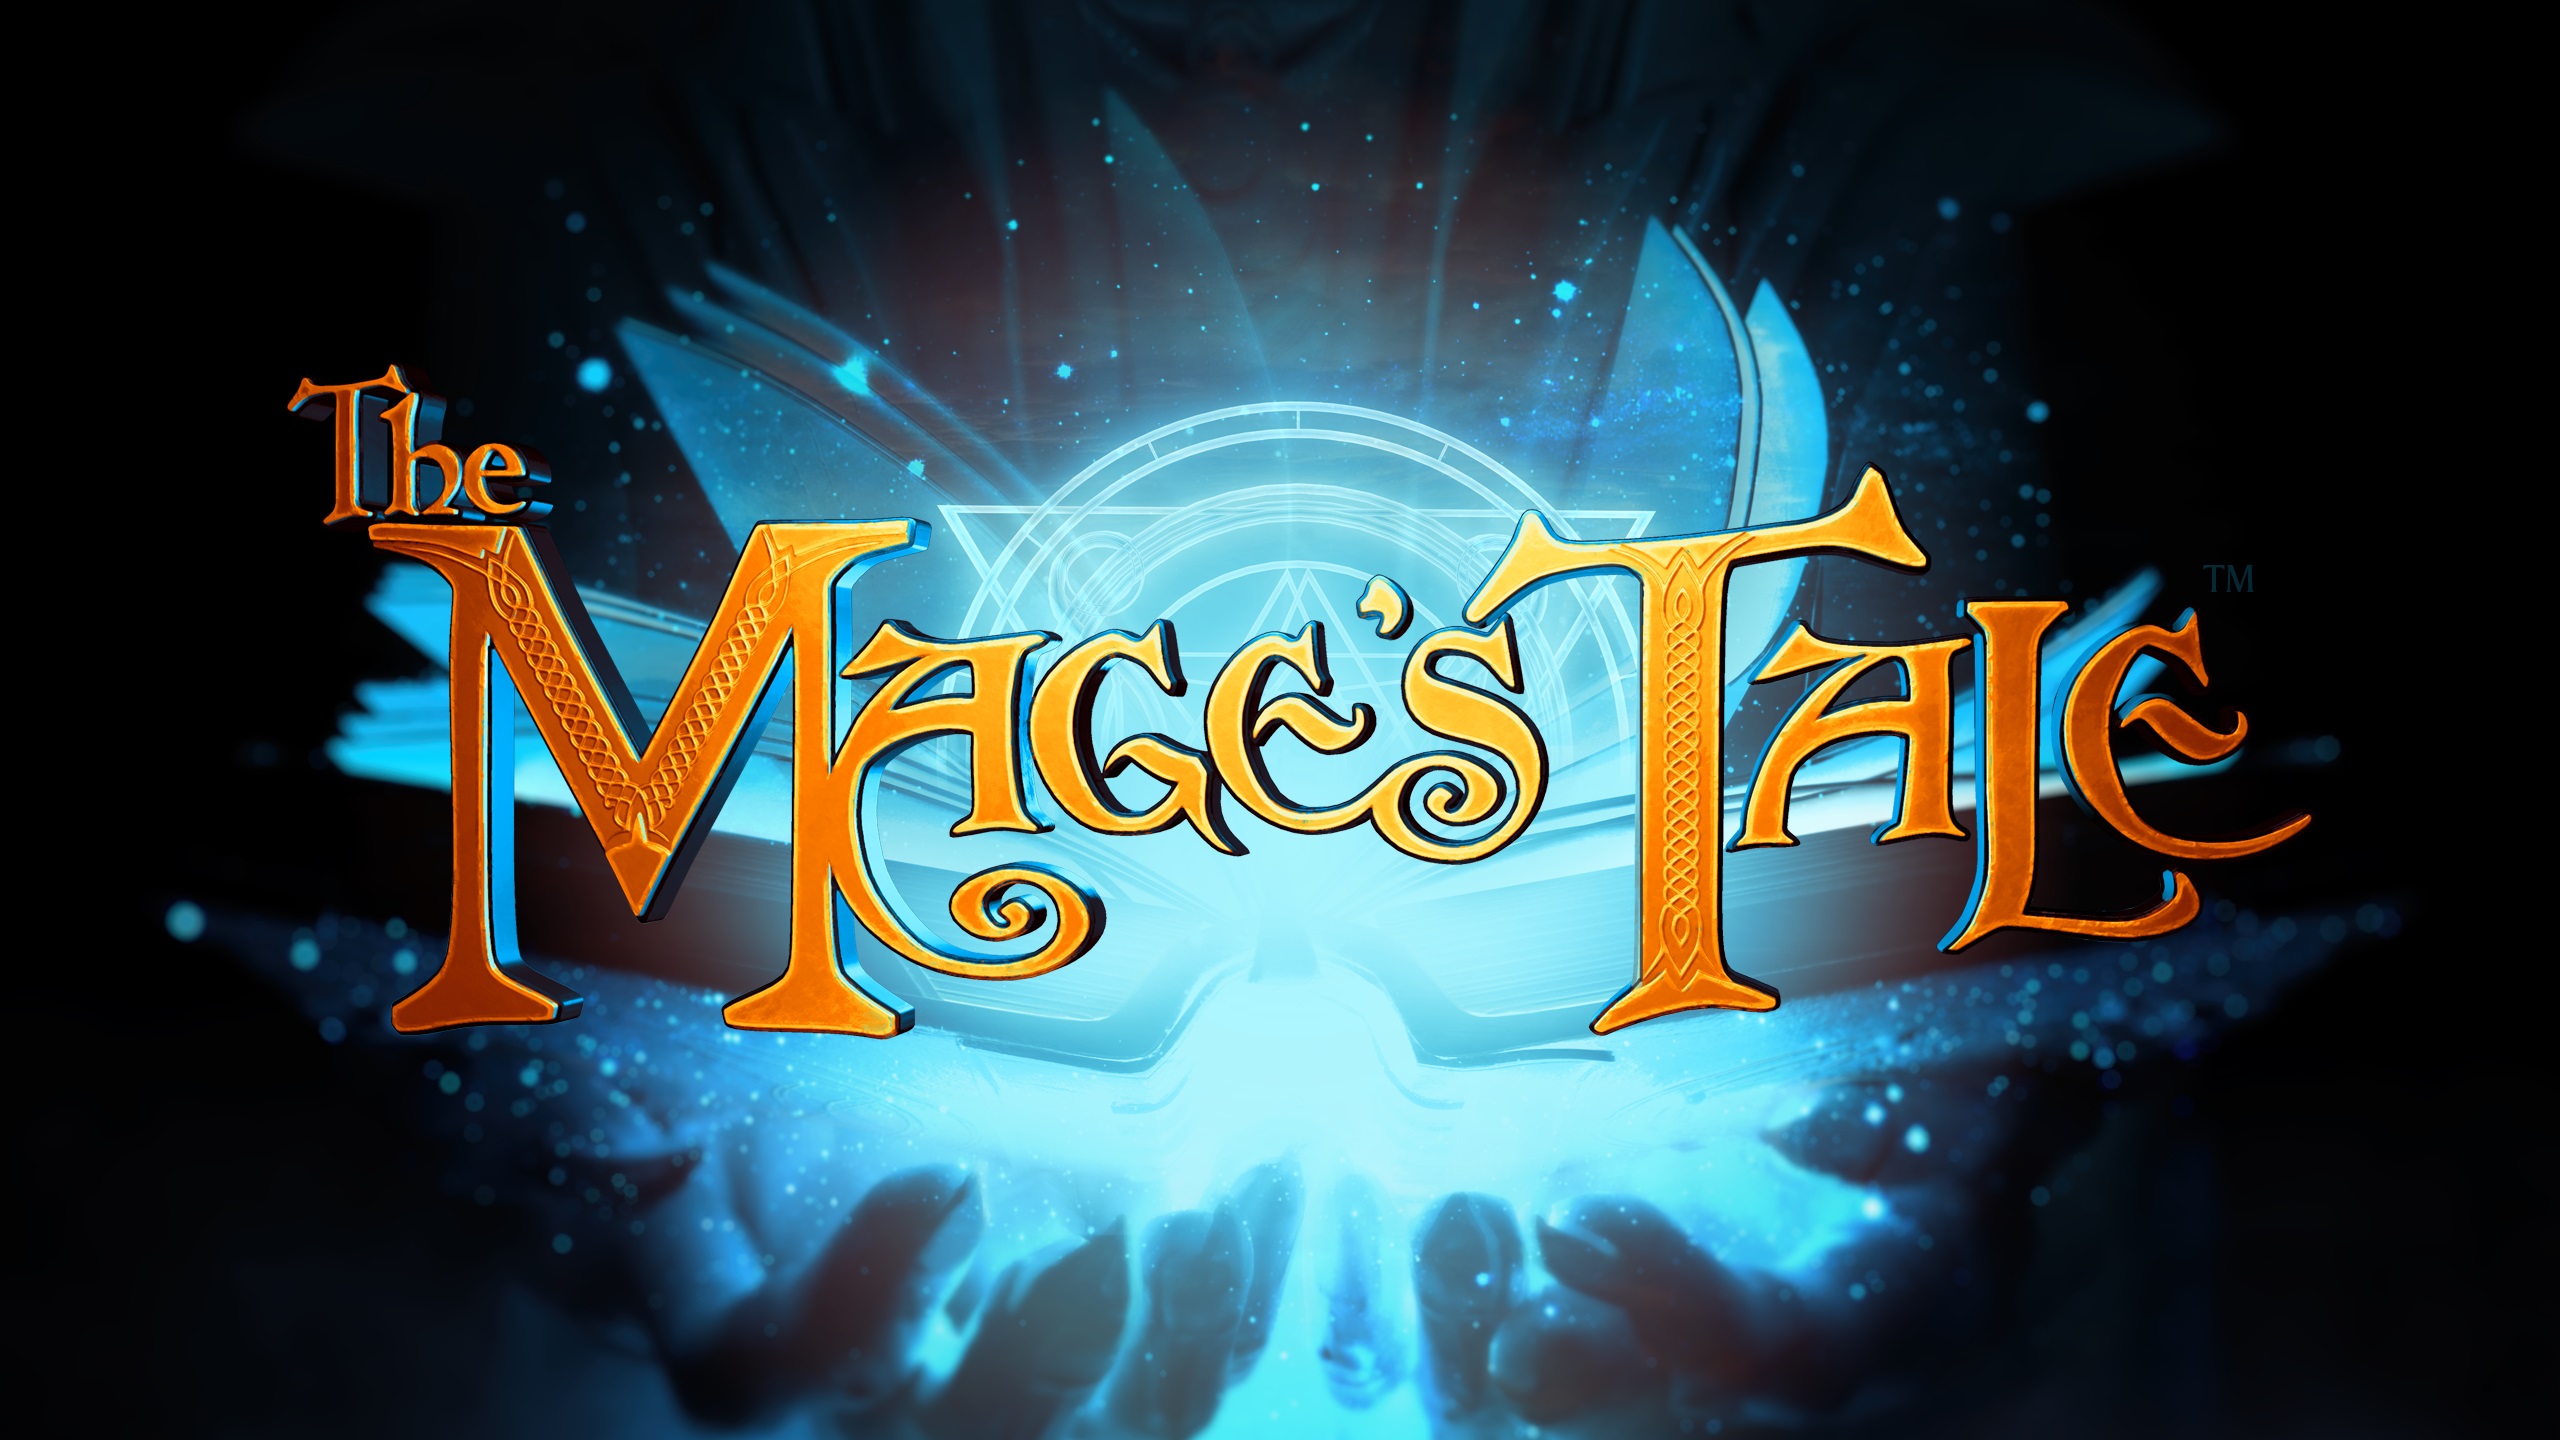 mages-touch-logo